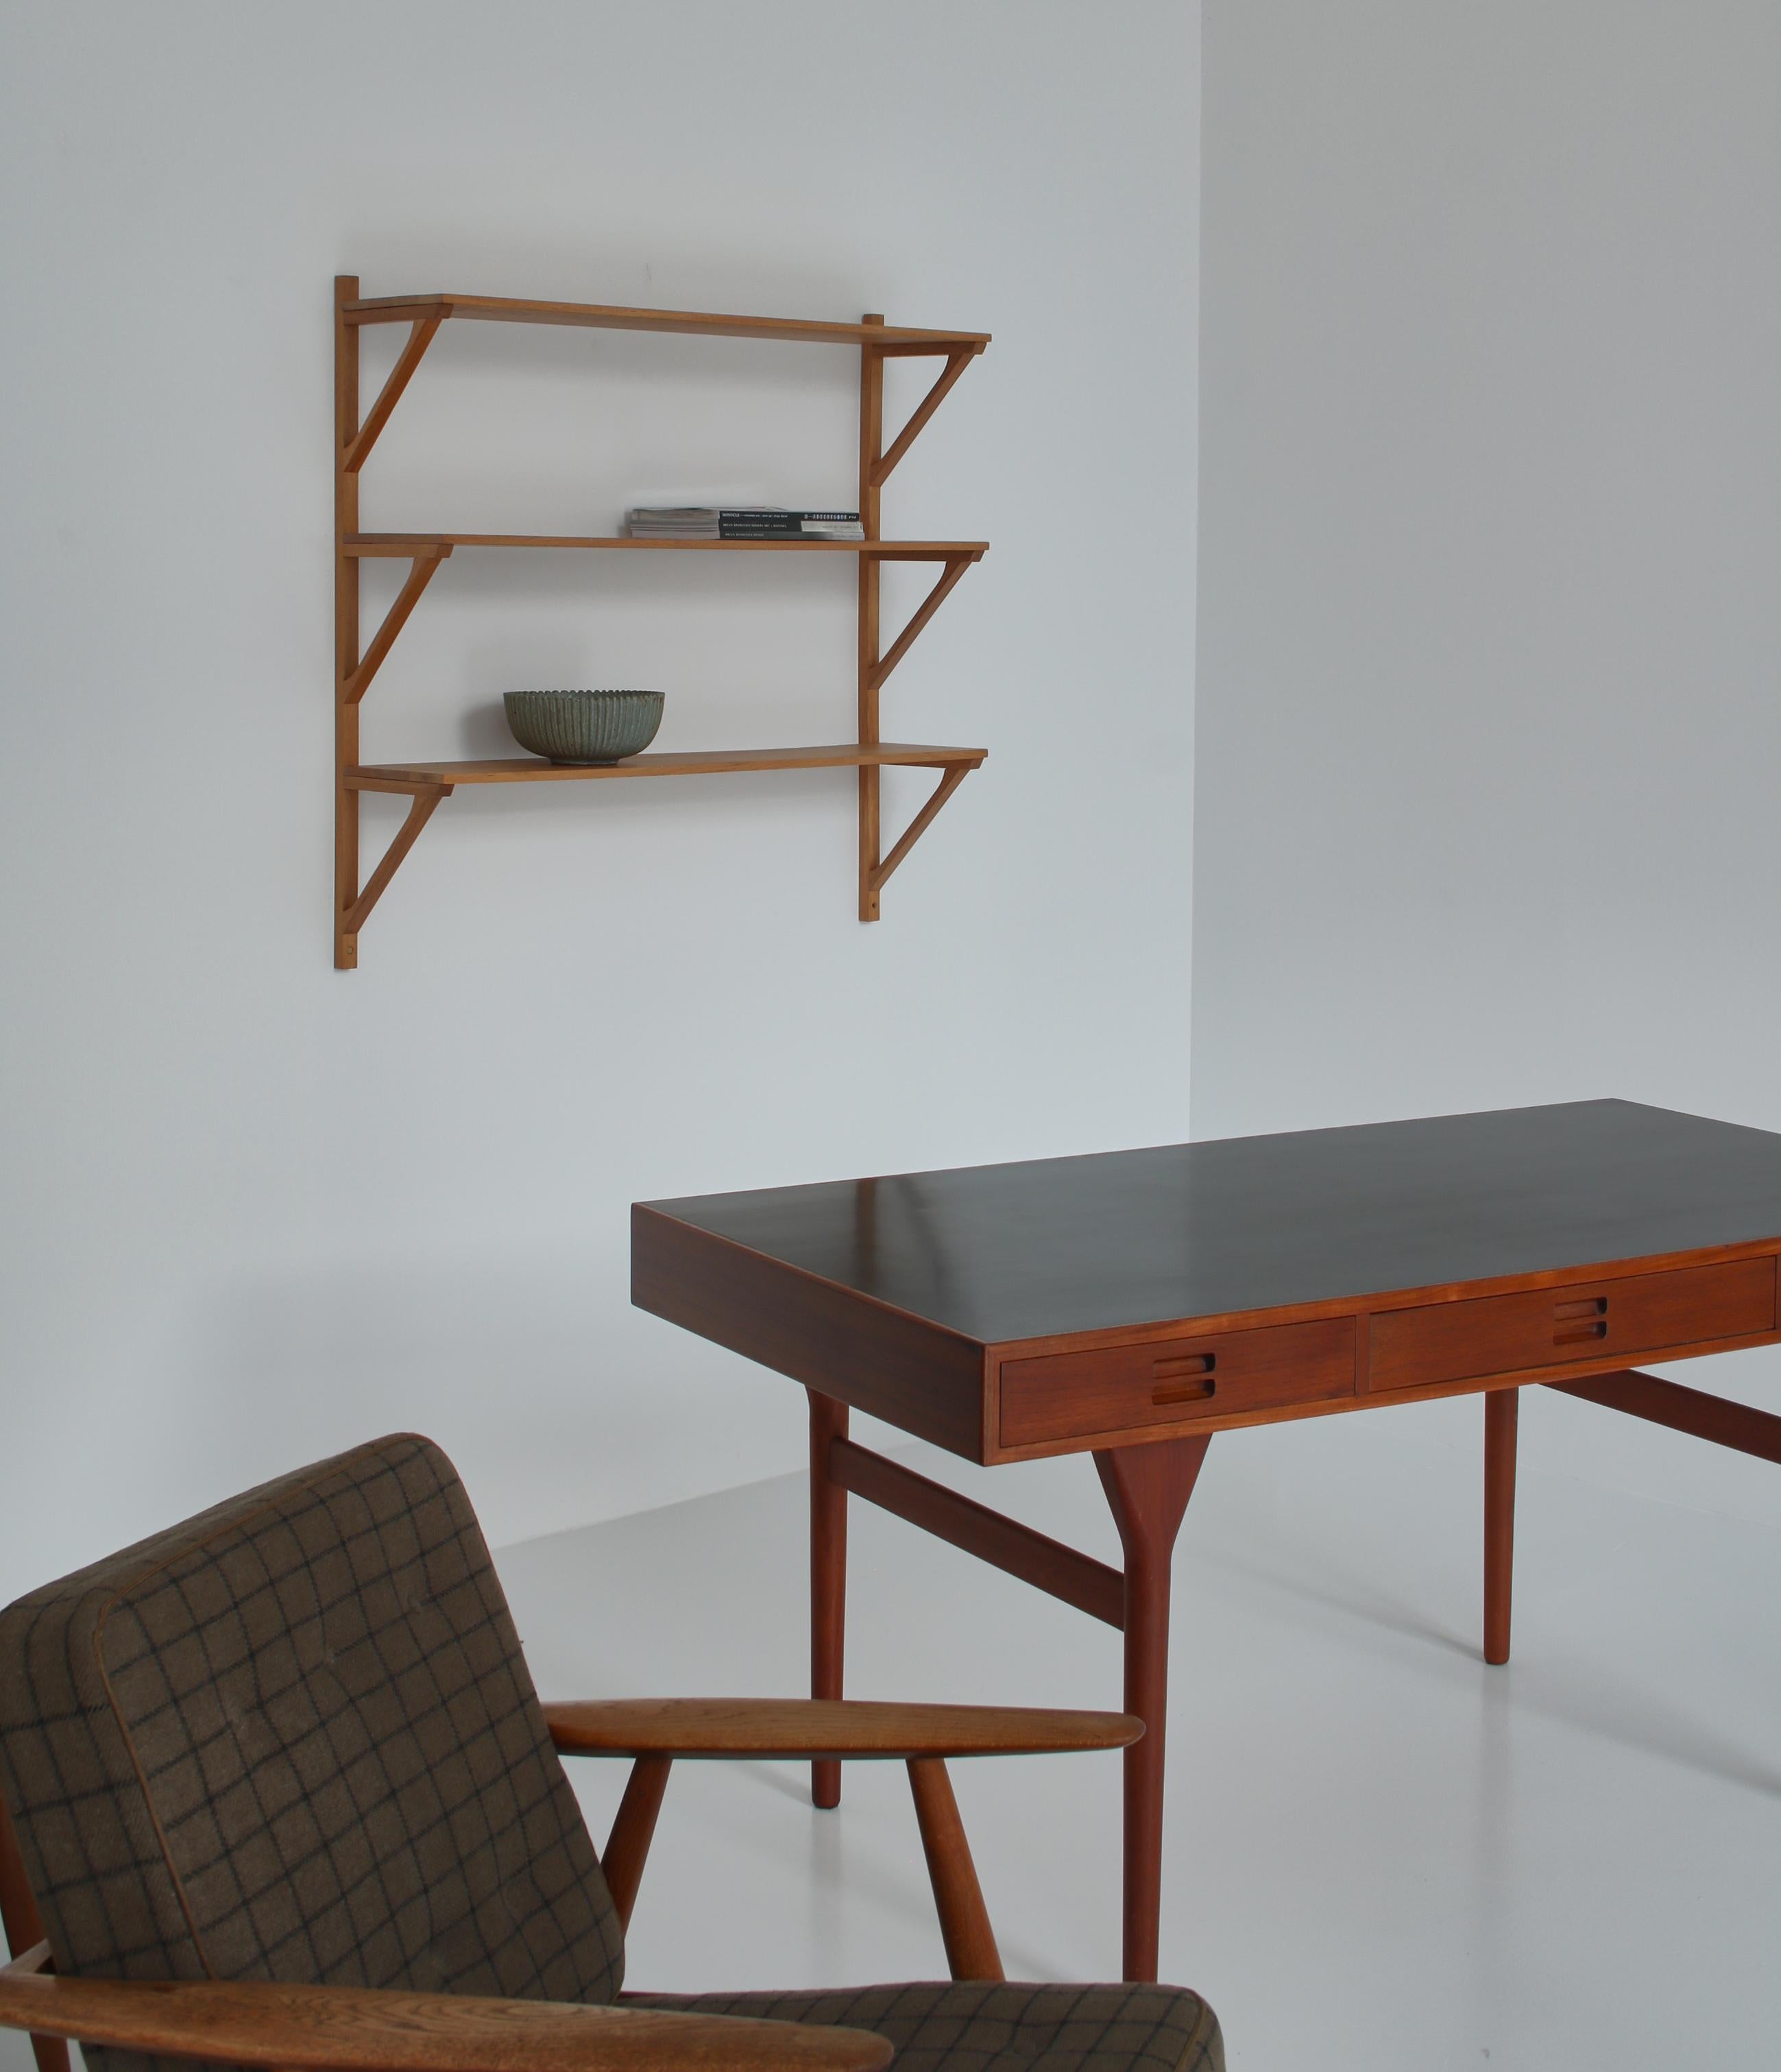 Rare and important wall shelving system in oak by Børge Mogensen made at cabinetmaker Erhard Rasmussen in 1956.